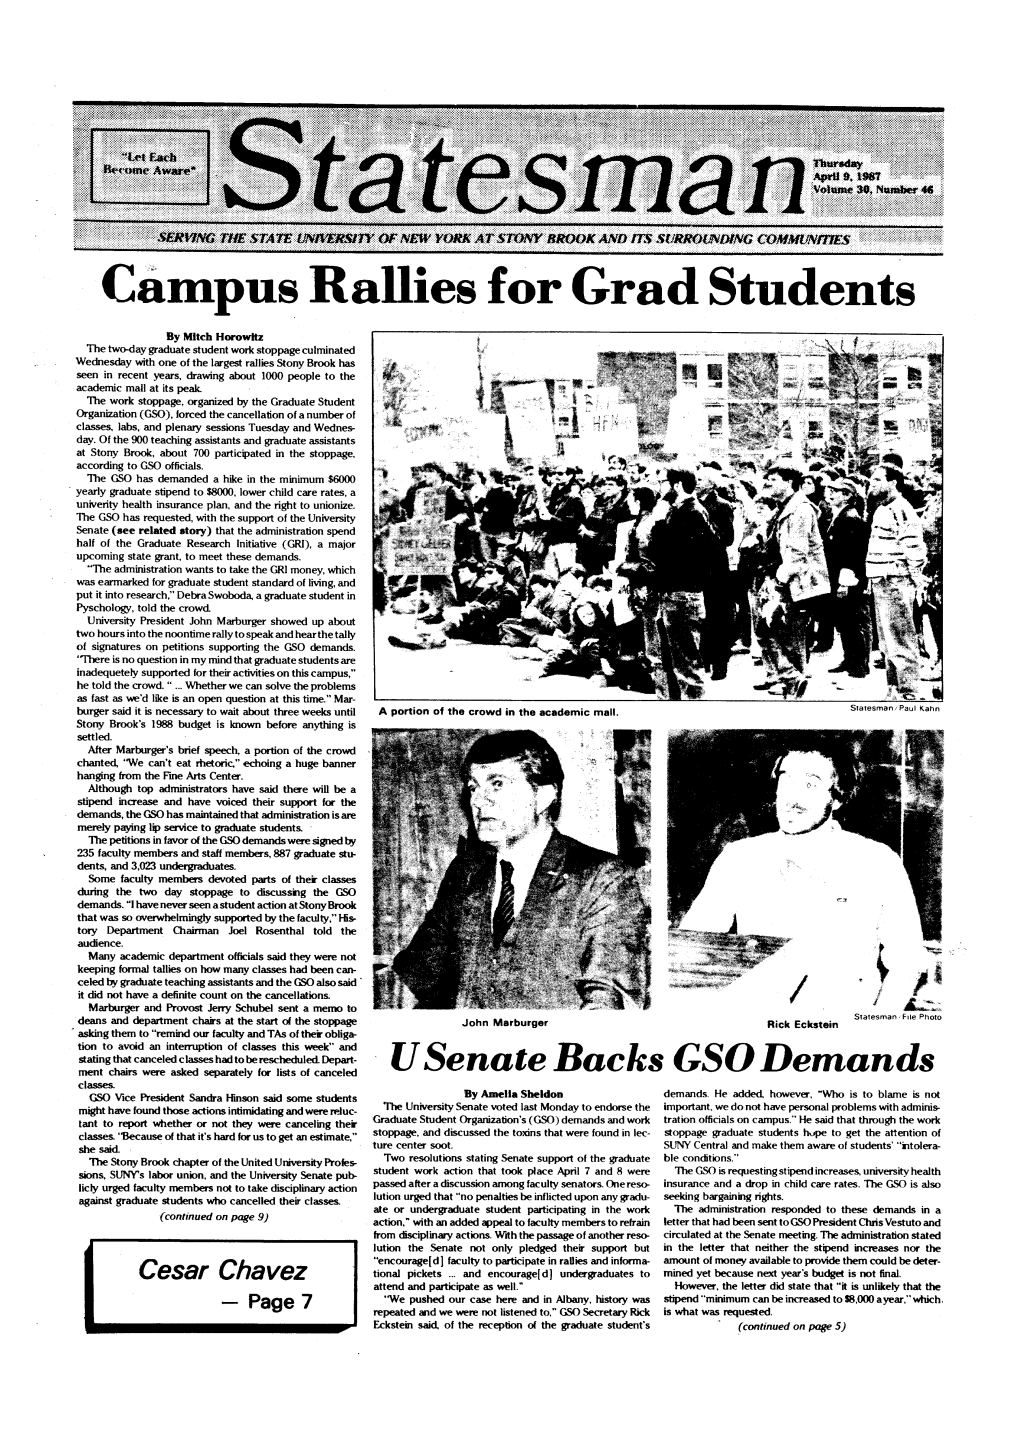 Campus Rallies for Grad Students